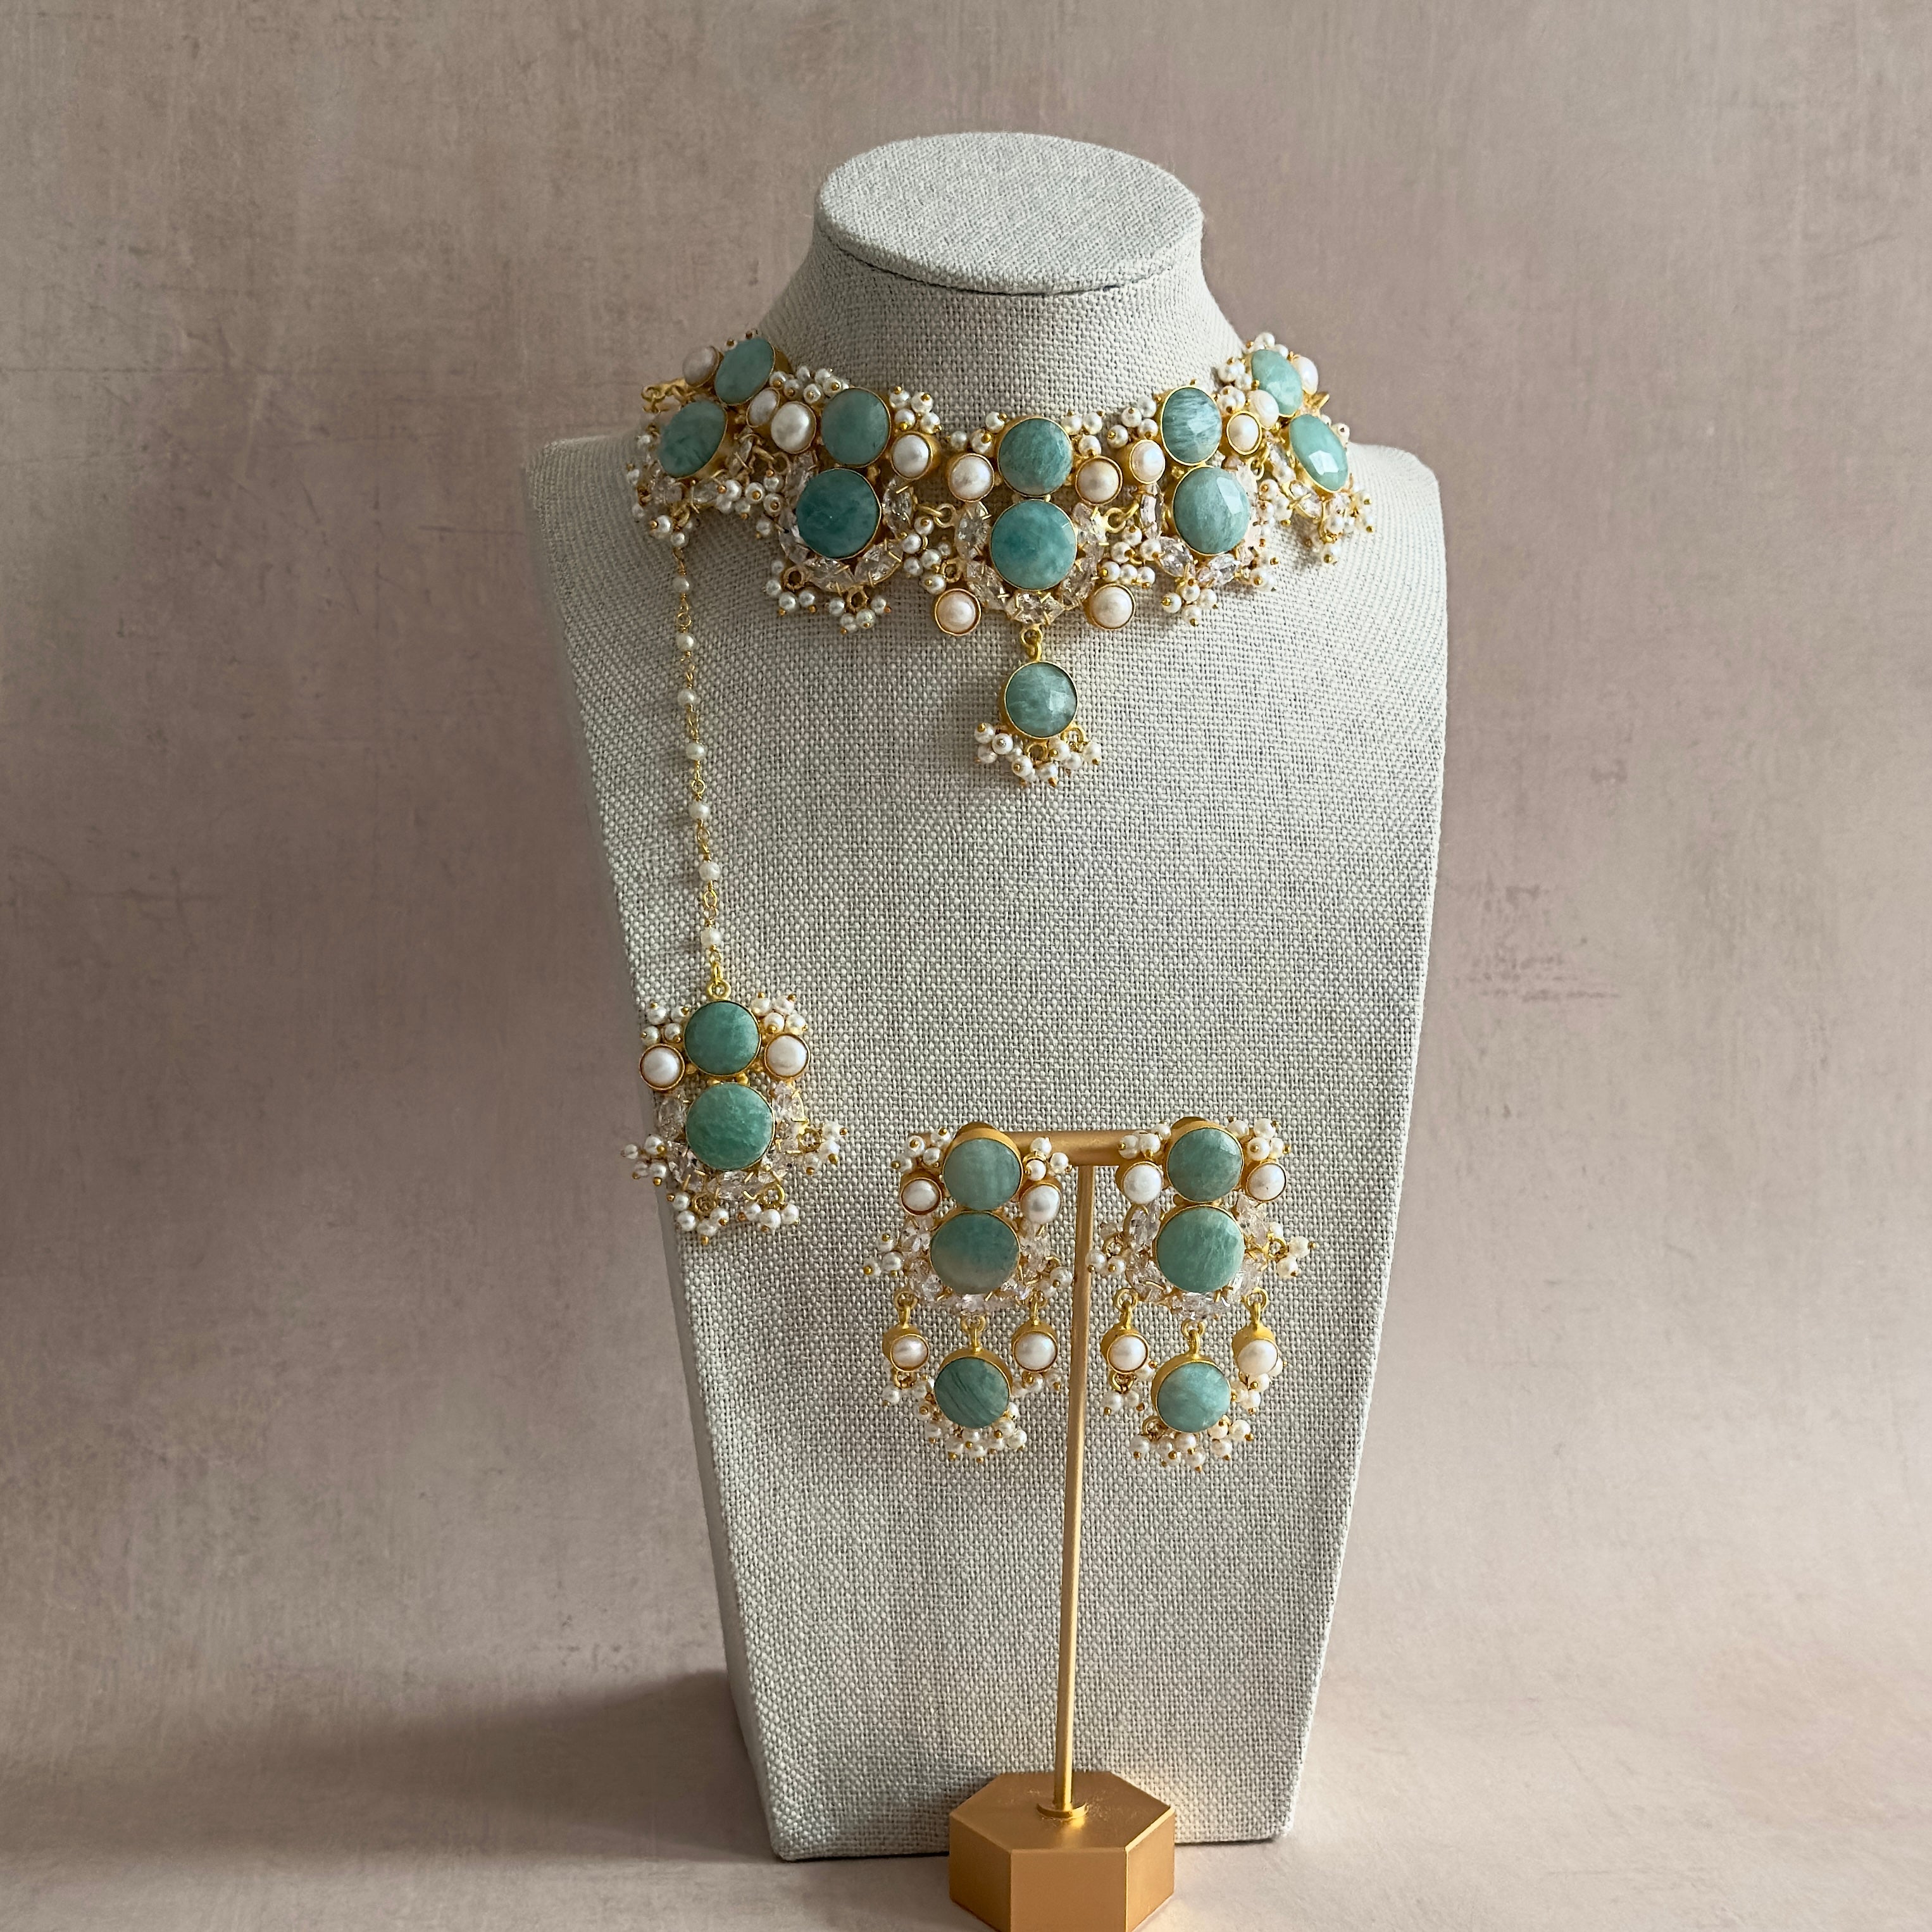 Make a statement with our Havana Jade Choker Set featuring natural amazonite stone, sparkling cubic zirconia, and unique freshwater pearls. Complete with matching earrings and tikka, this set exudes elegance and adds a touch of nature to your look. Elevate any outfit with this one-of-a-kind set!